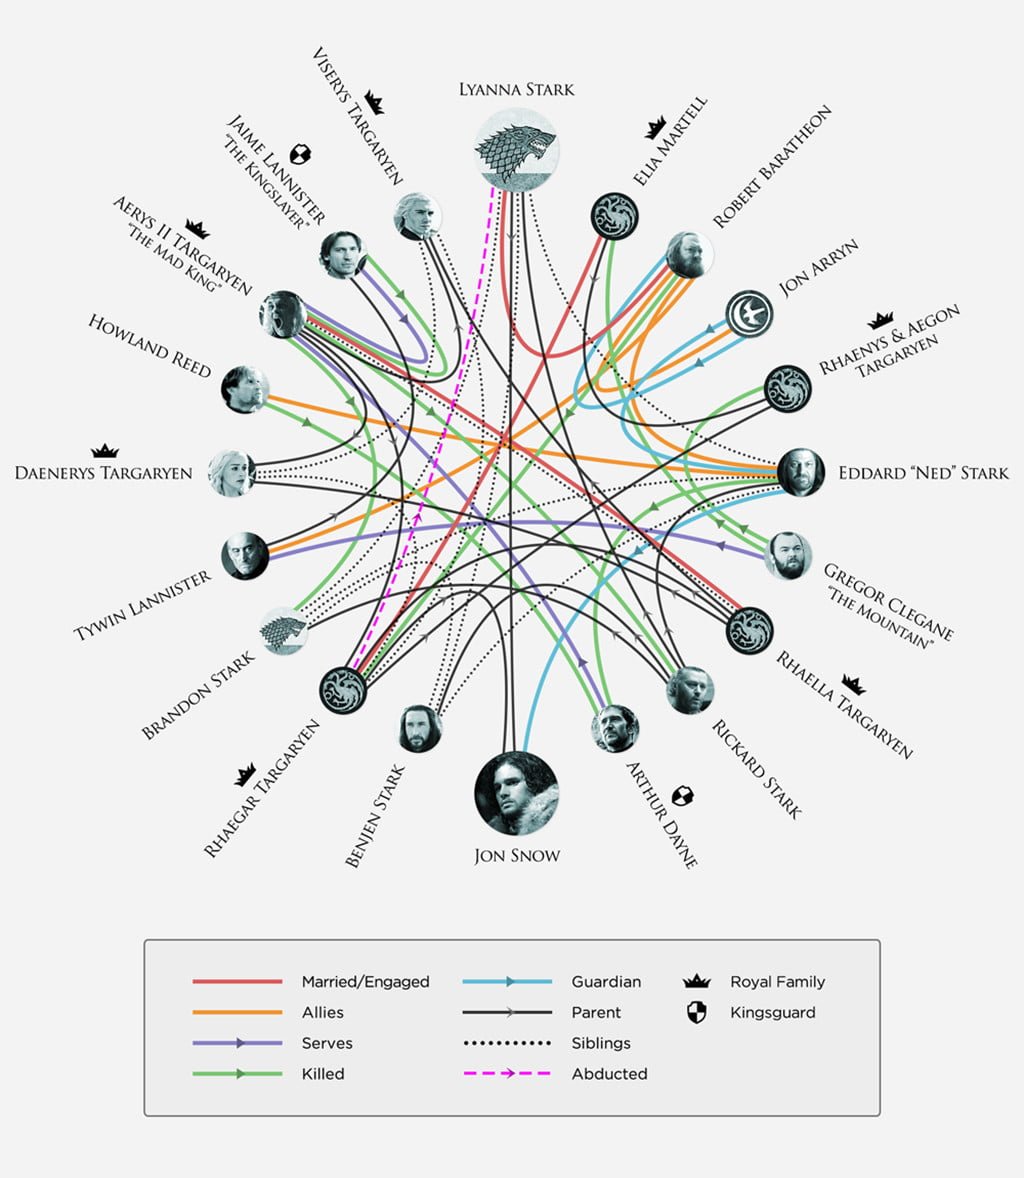 Game-of-Thrones-Infographic